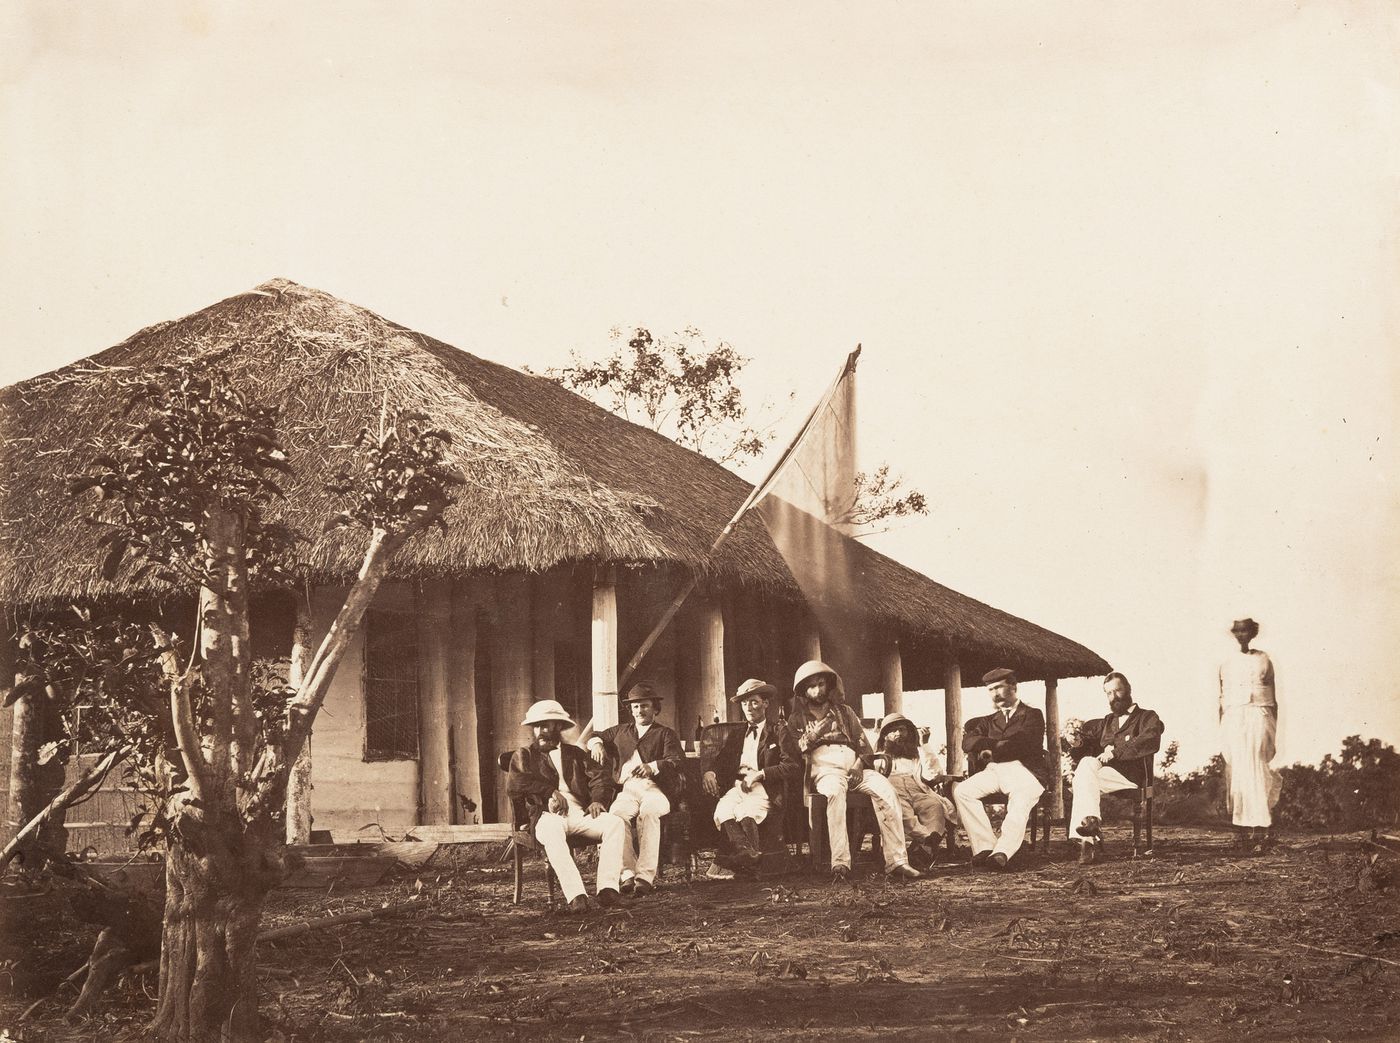 Group portrait of seven tea planters sitting and woman standing before thatched bungalow, probably Assam, India